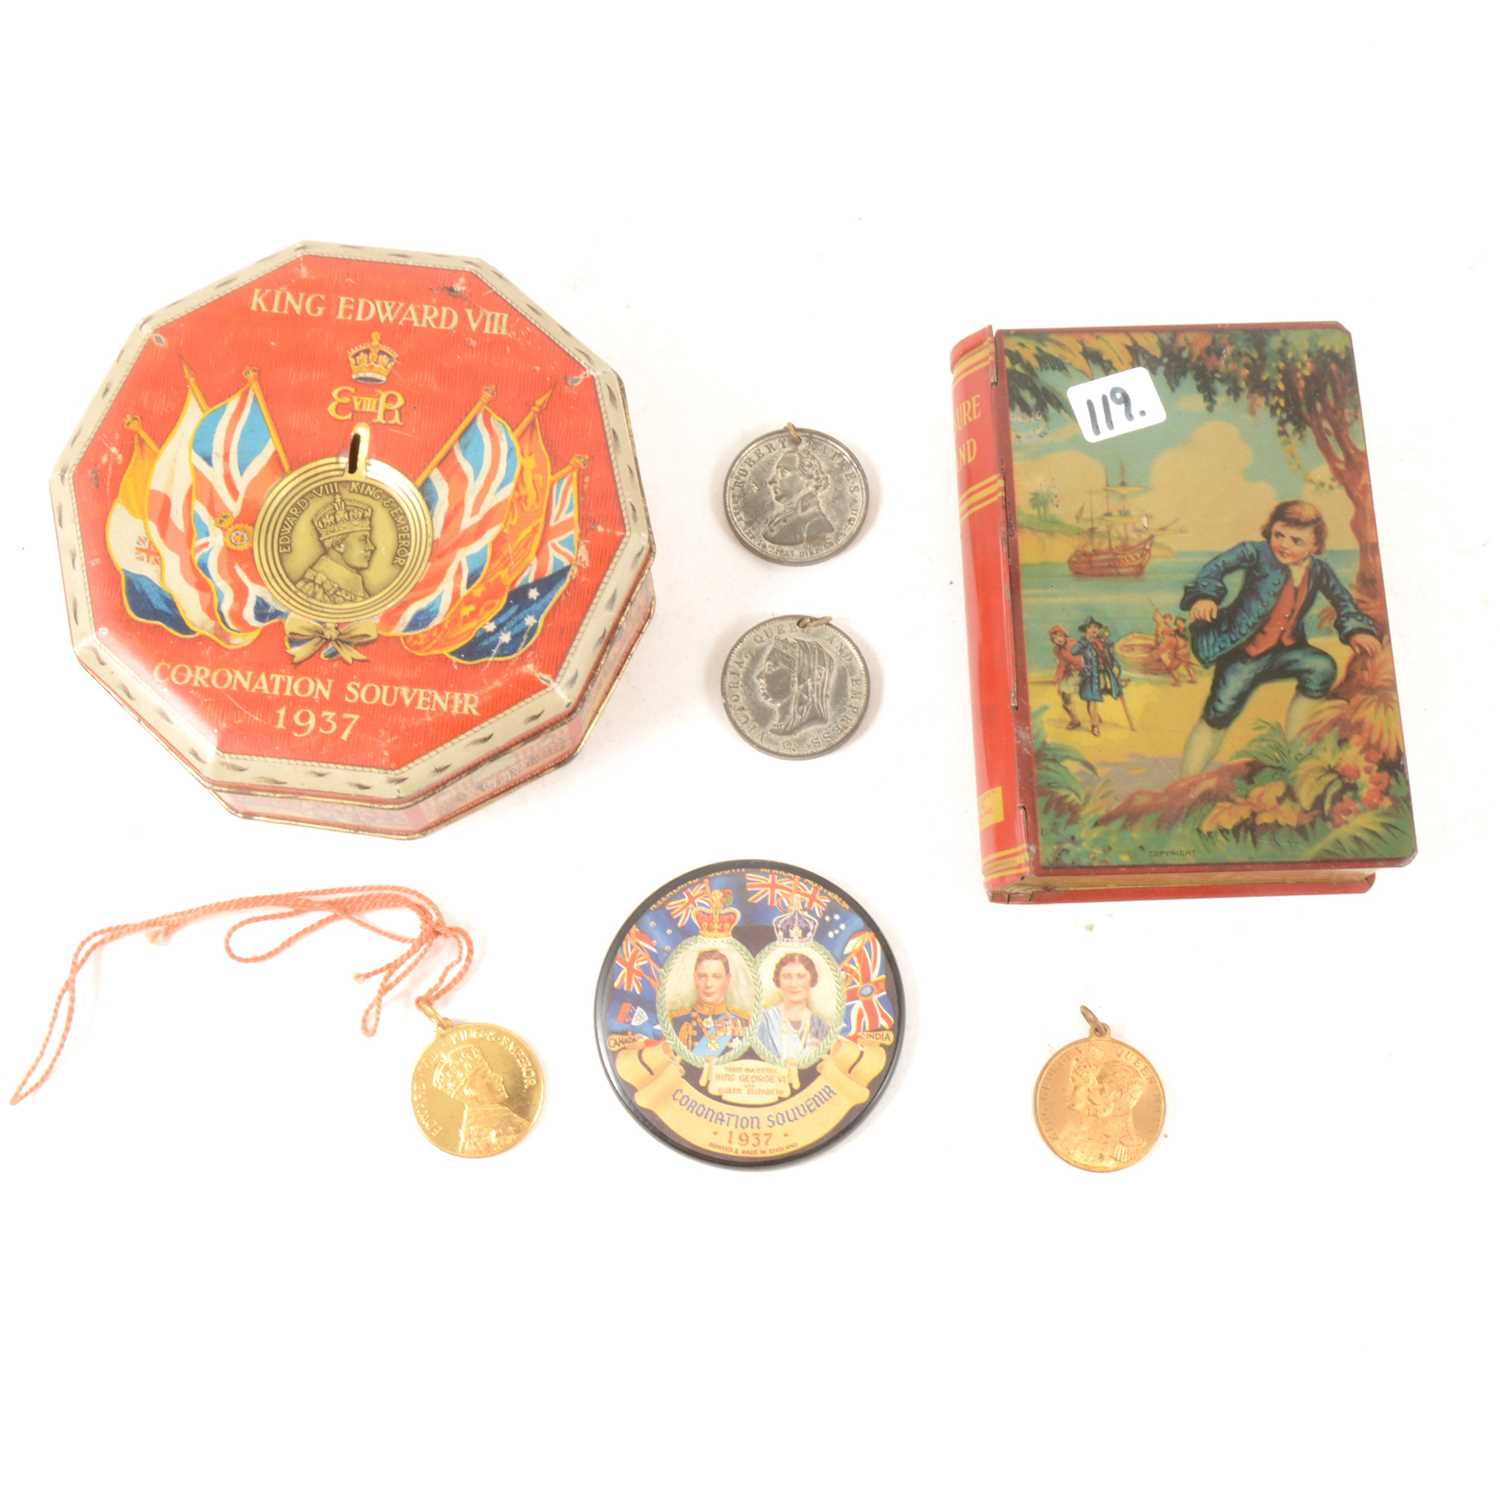 Lot 119 - A rare Rowntree Edward VIII Coronation tin complete with detachable medal together with a Chad Valley 'Treasure Island' tin book moneybox etc.